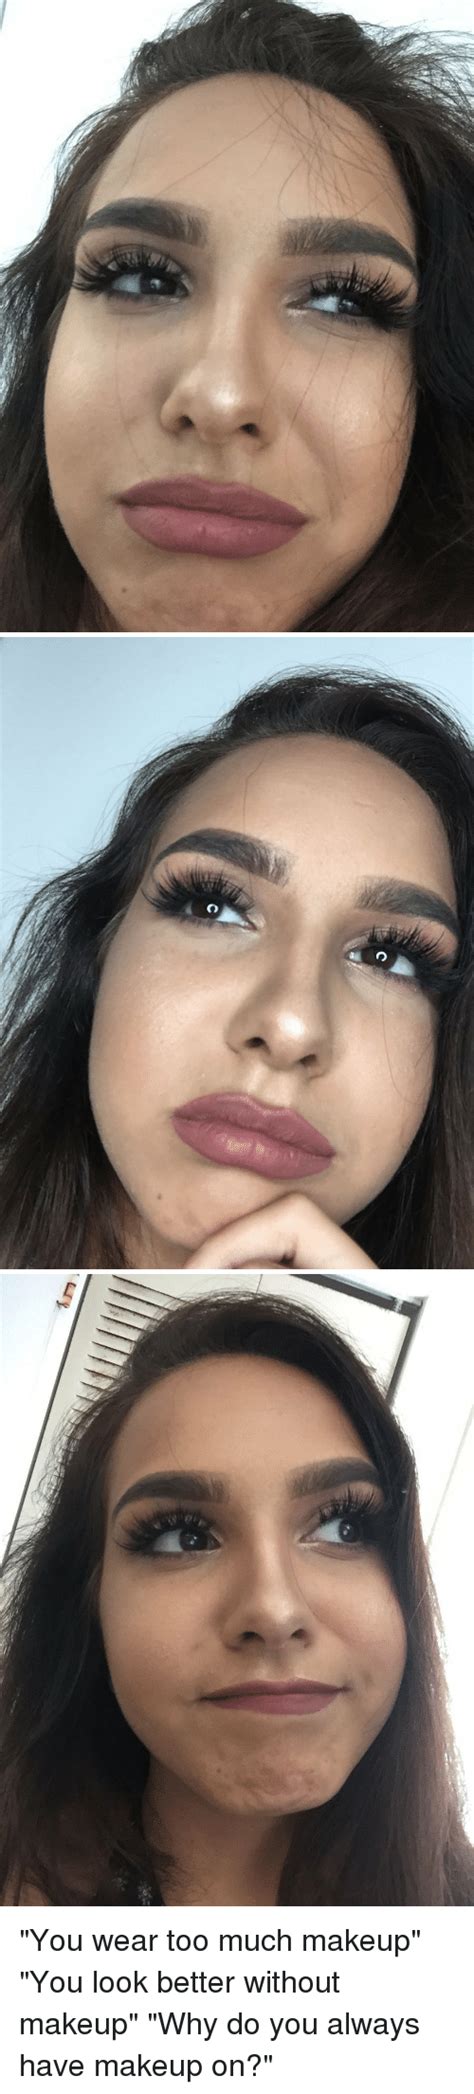 25 Best Memes About Makeup Too Much And Girl Memes